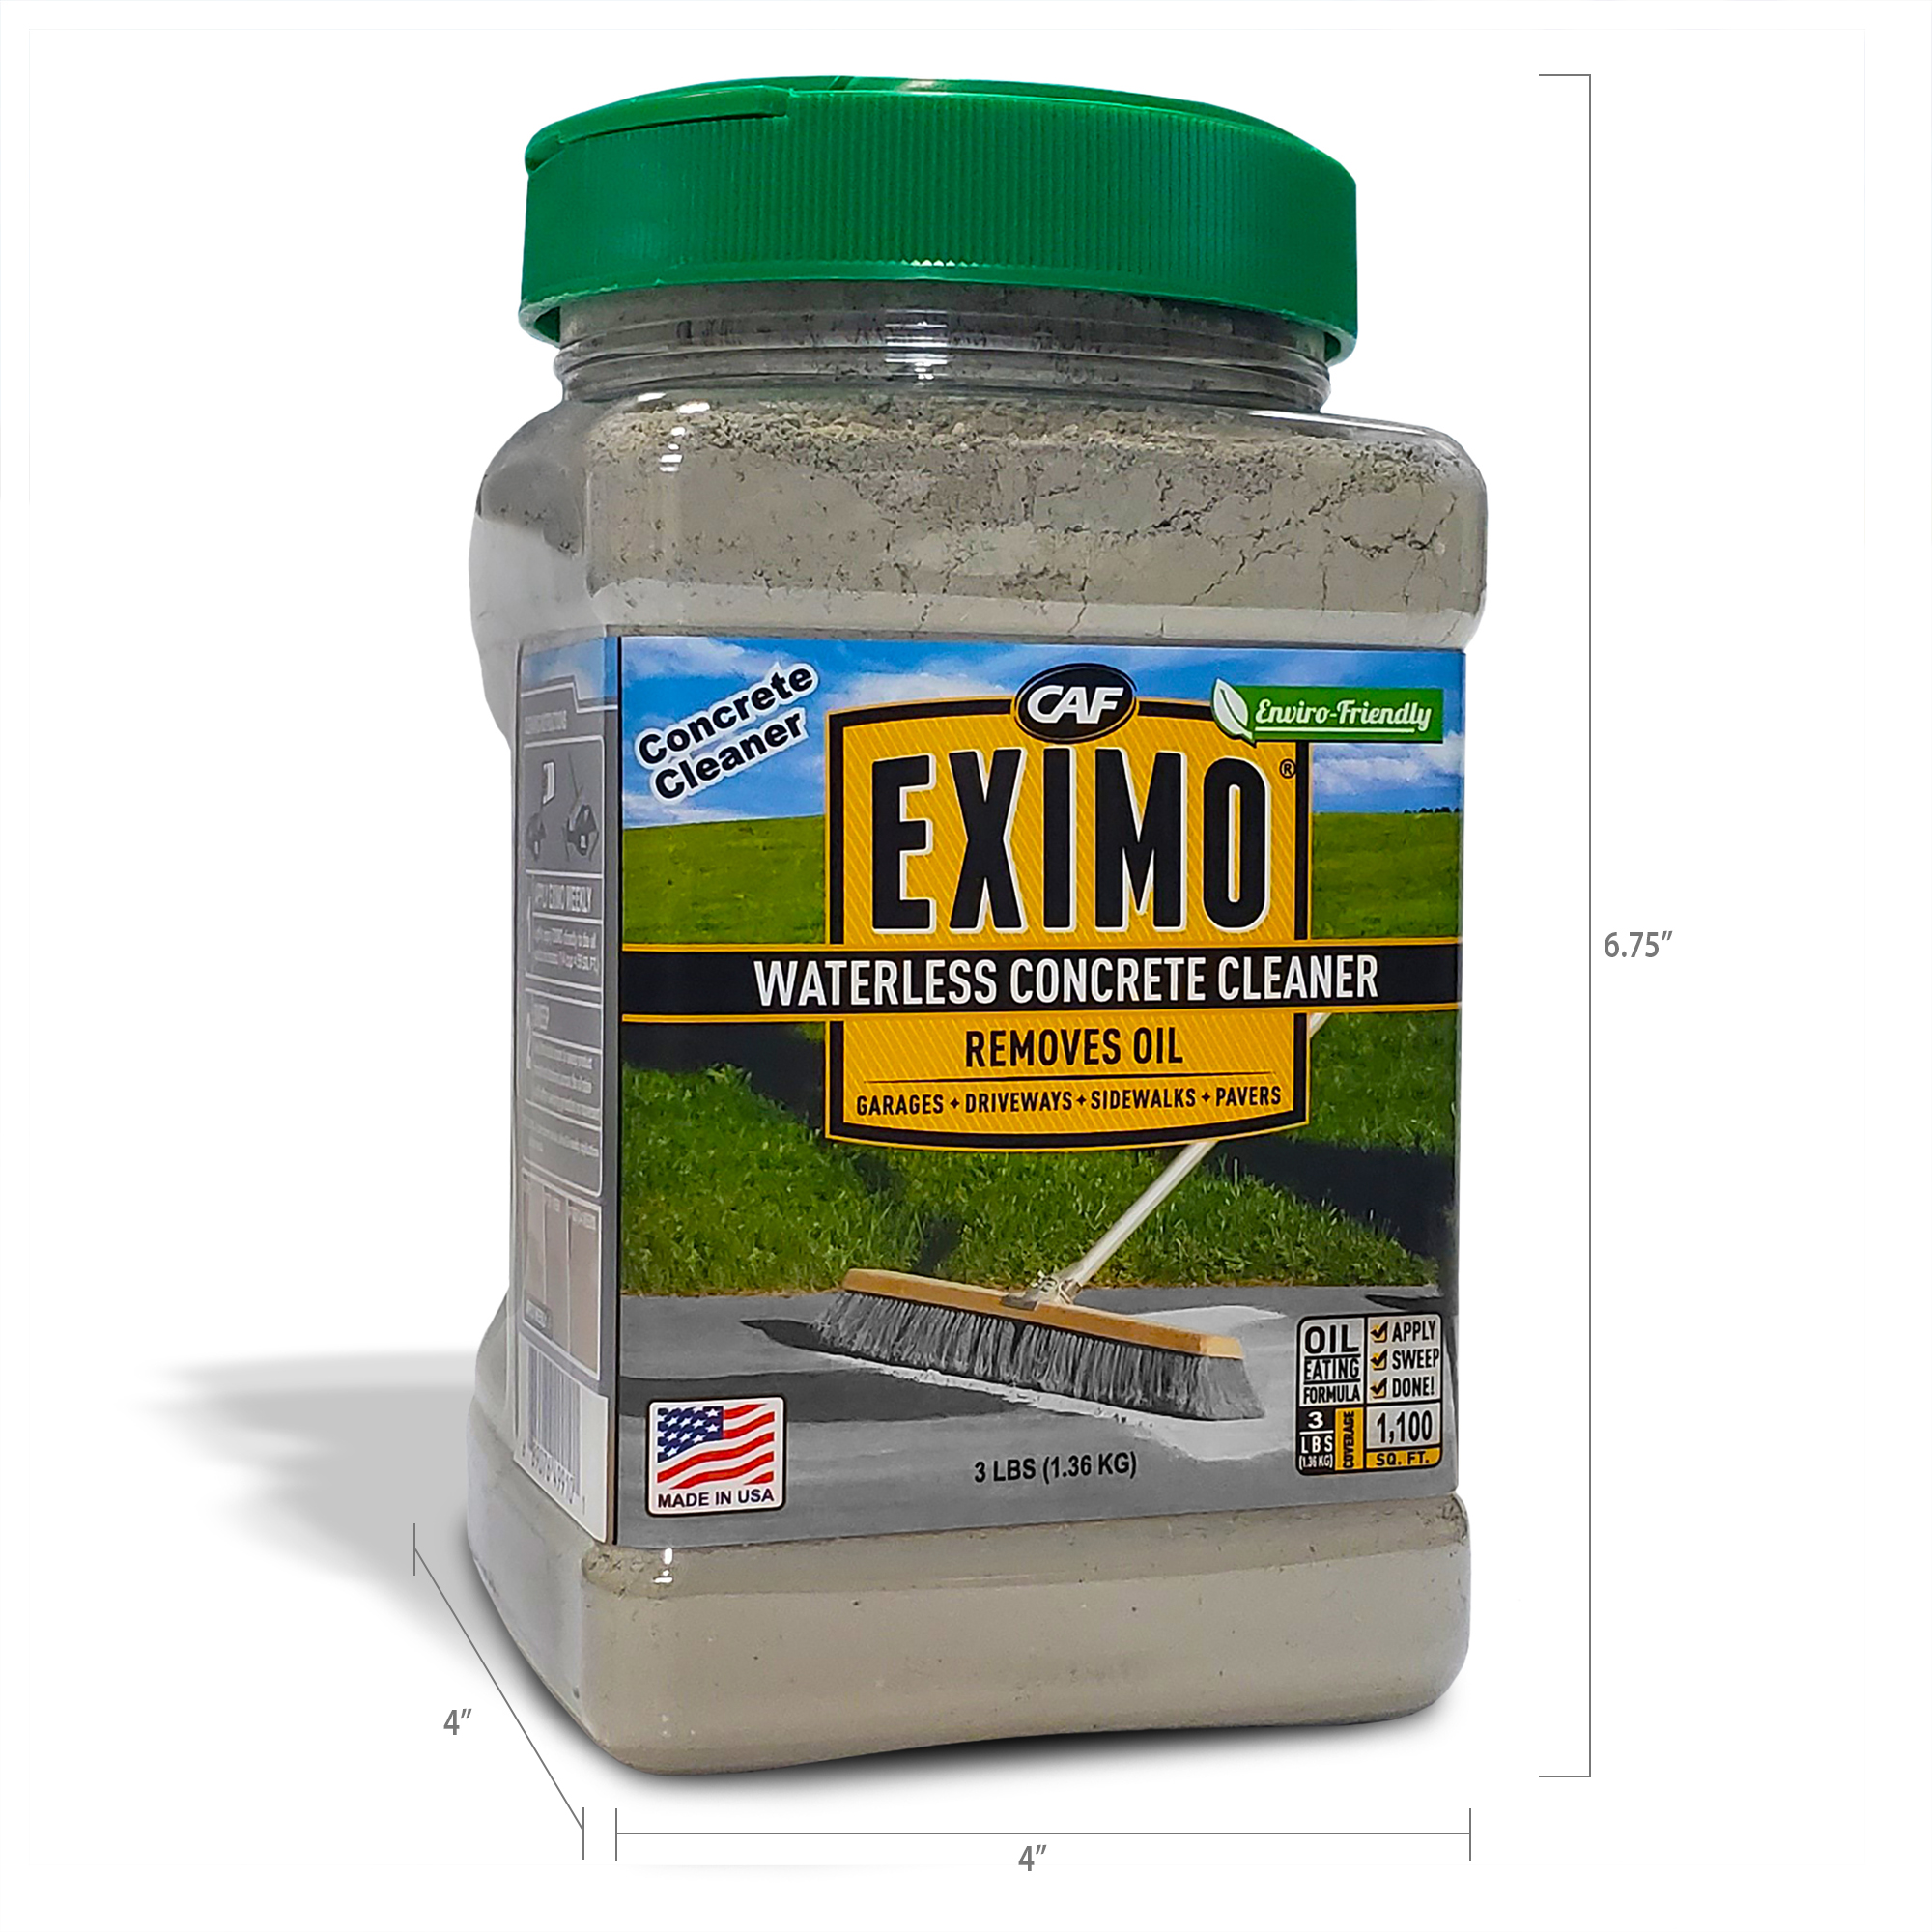 EXIMO Waterless Concrete Cleaner by CAF Outdoor Cleaning for Driveway, Garage, Basement, and Walkway Surfaces, 3 lbs, Advanced Stain Remover for Oils and Other Petroleum Stains - image 4 of 8